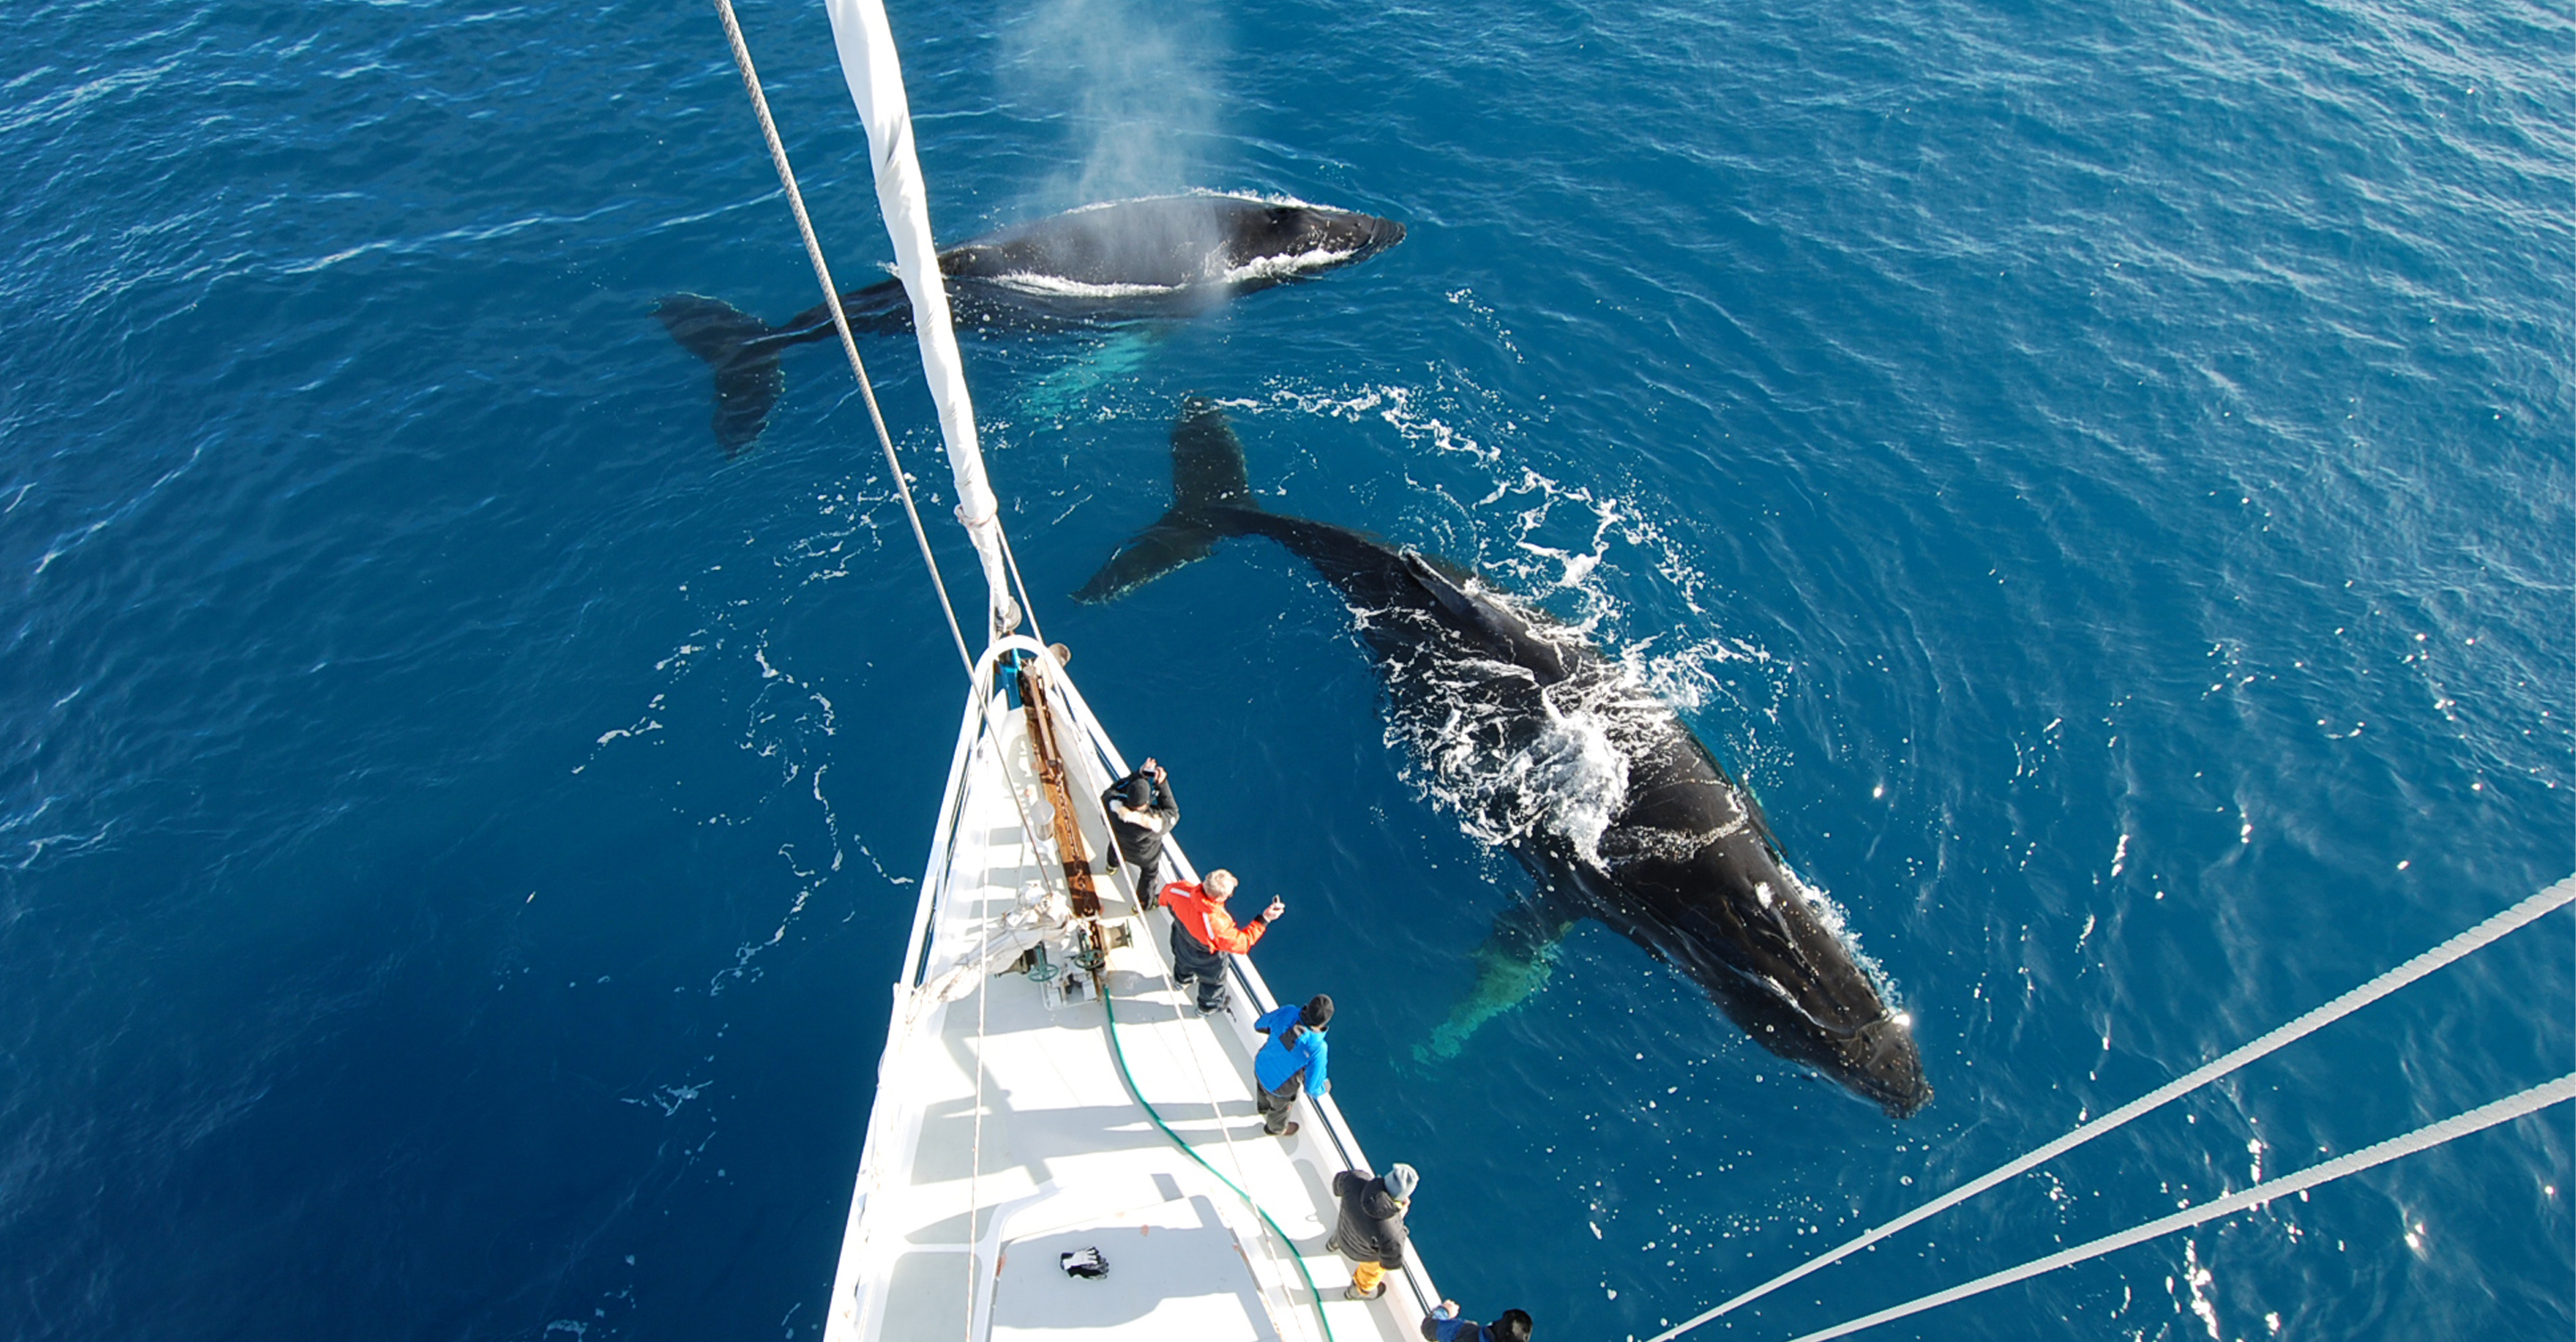 Aerial view of the bow of the S/V Australis as two whales swim in front, Antarctica